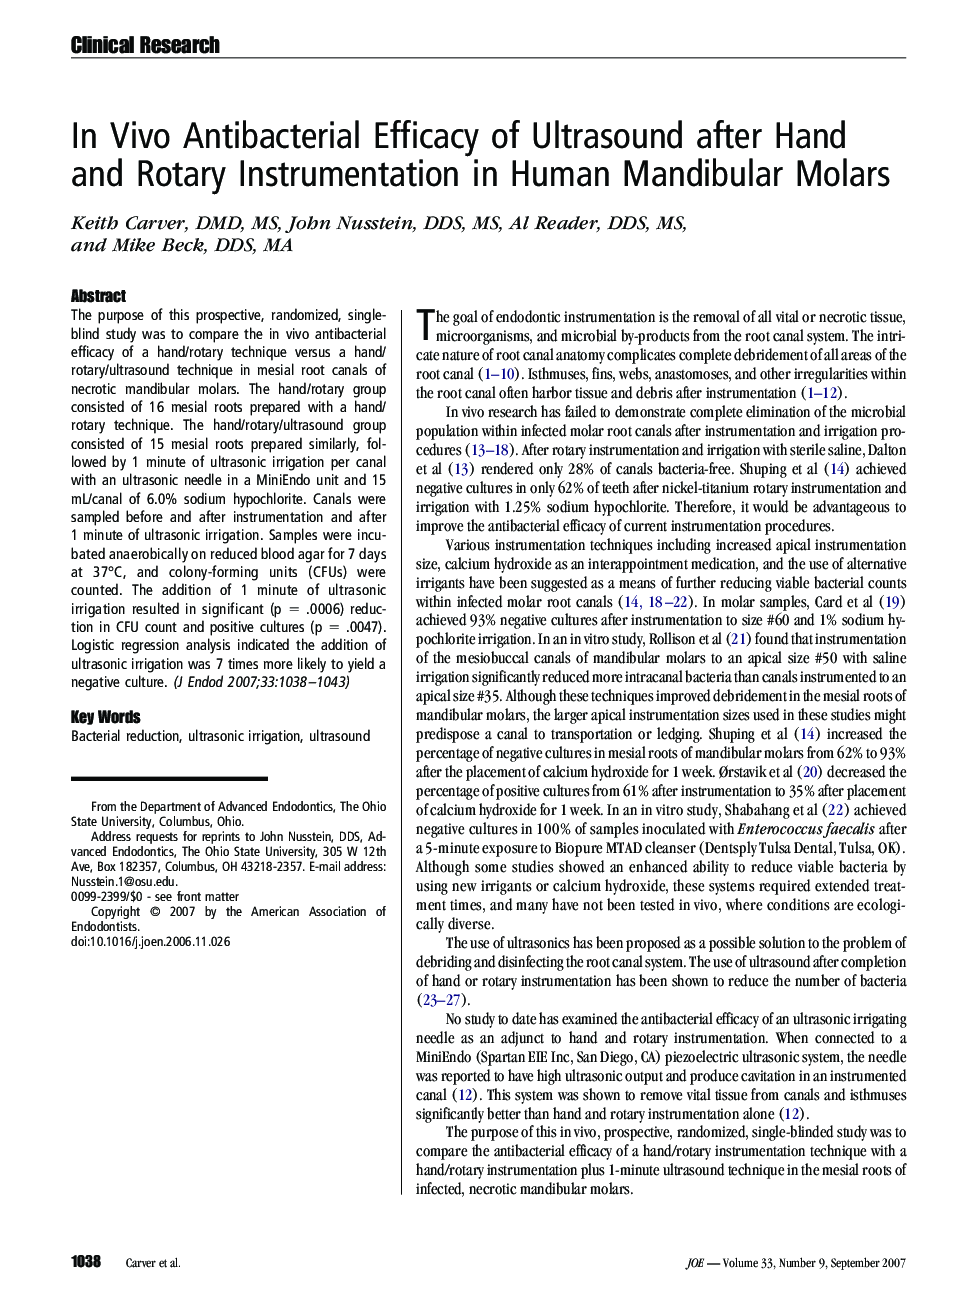 In Vivo Antibacterial Efficacy of Ultrasound after Hand and Rotary Instrumentation in Human Mandibular Molars